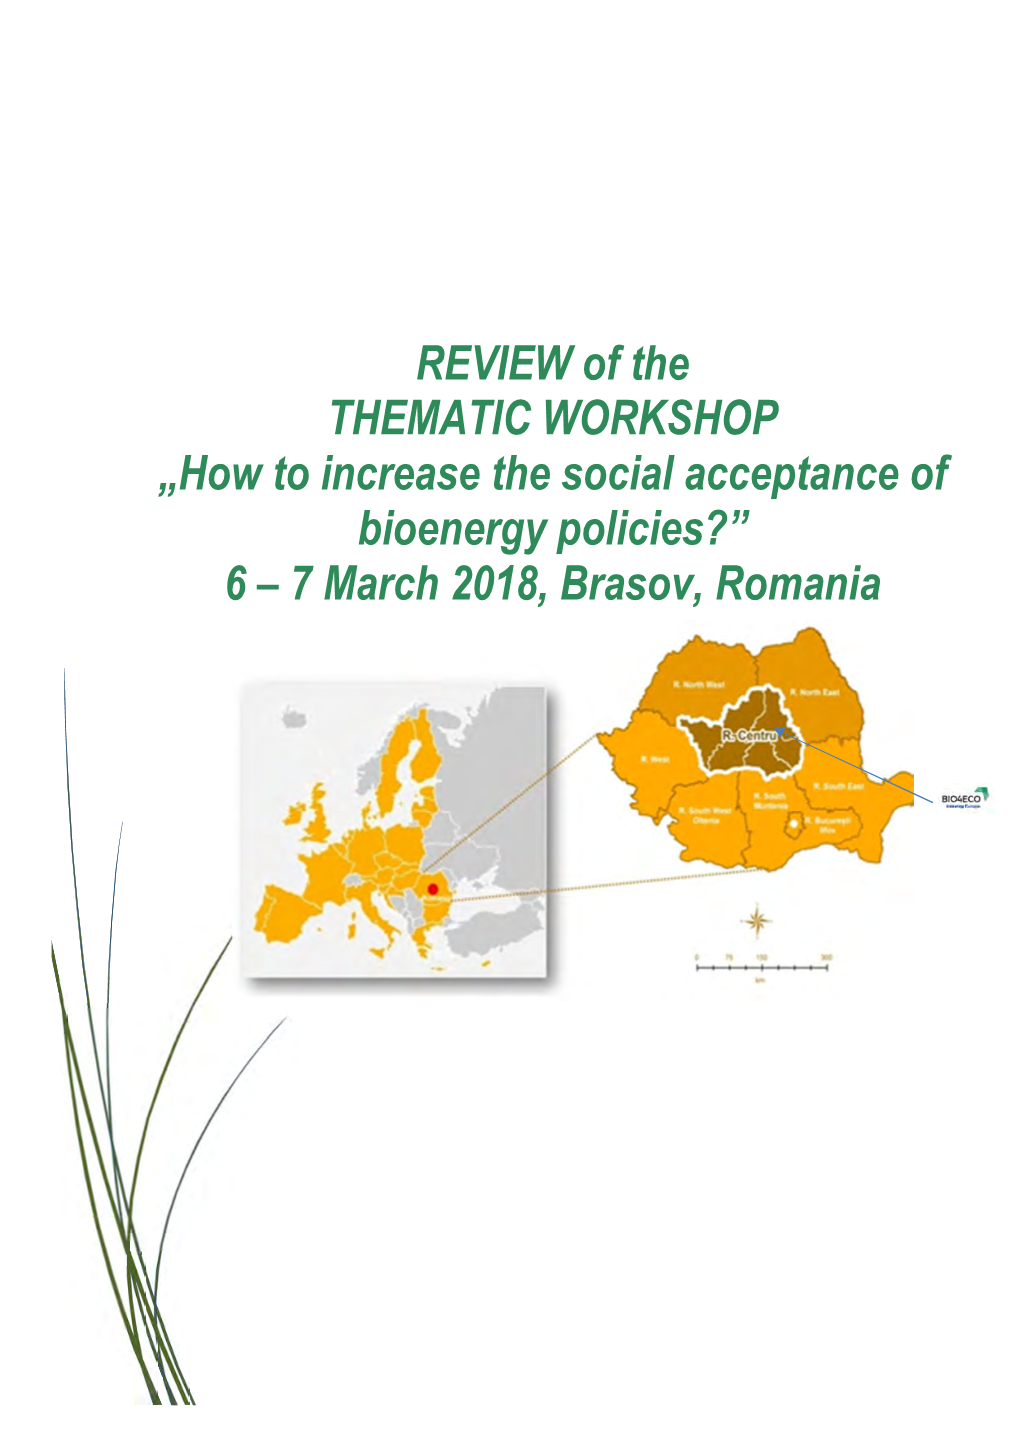 REVIEW of the THEMATIC WORKSHOP